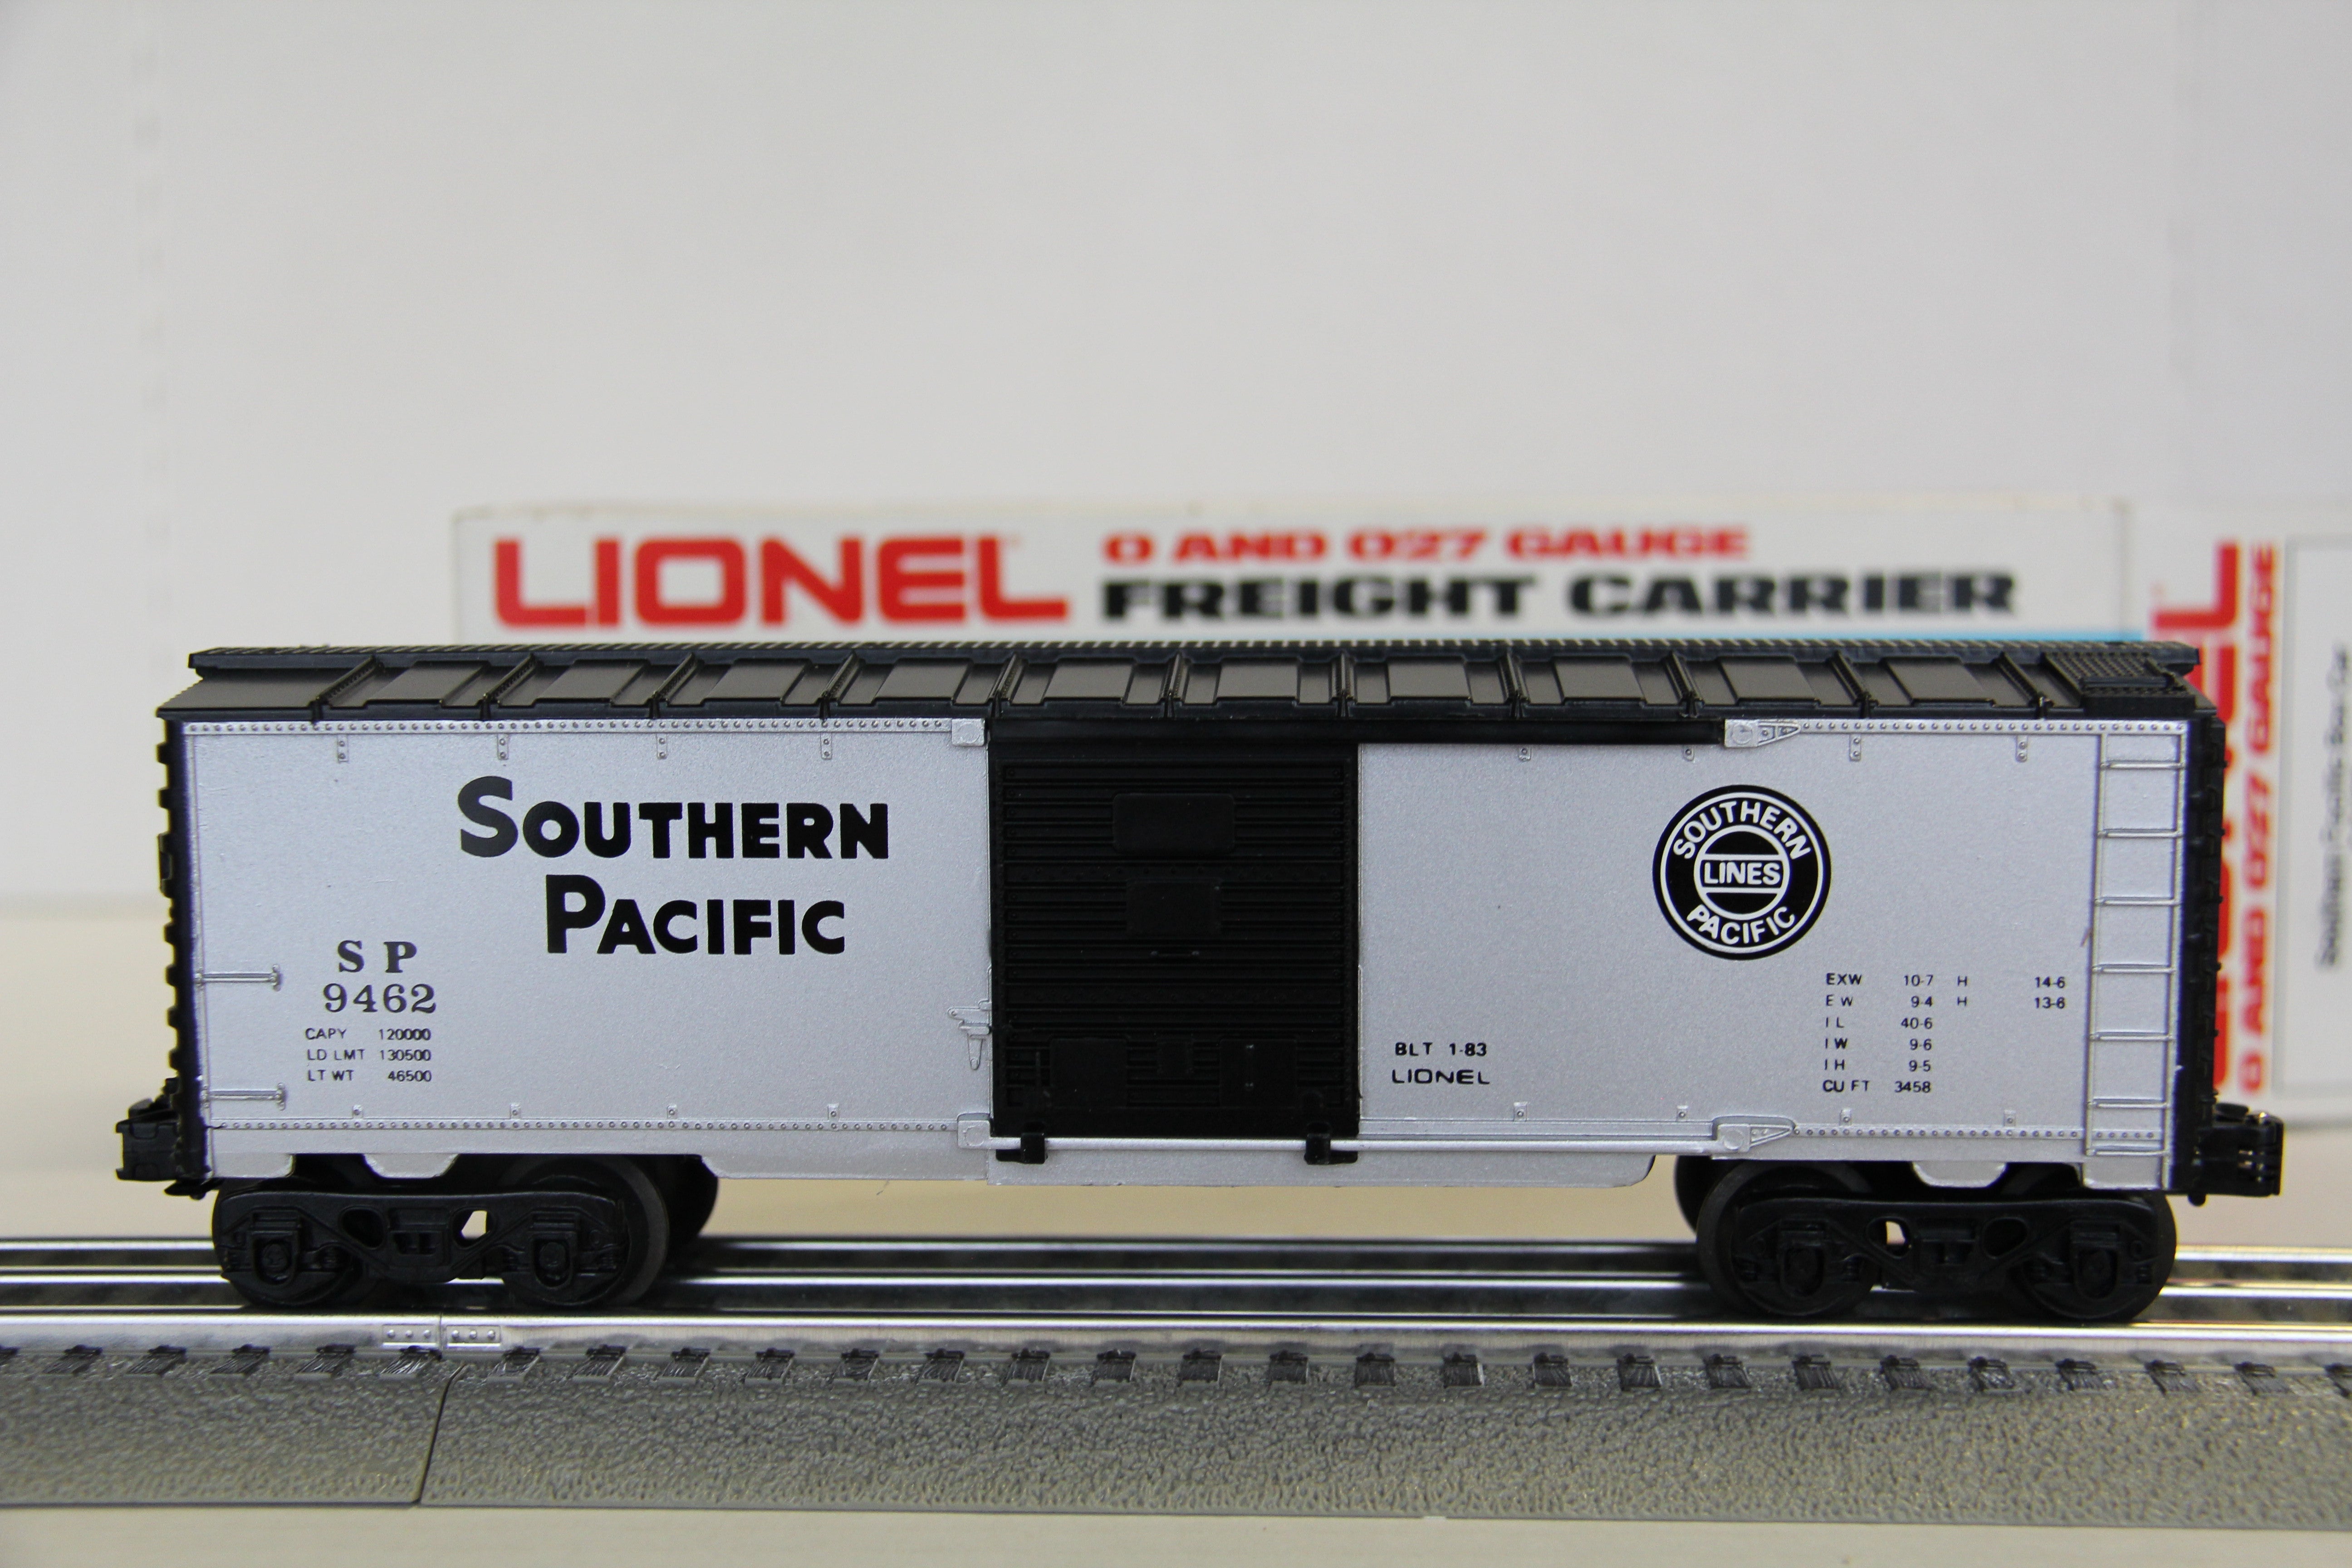 Lionel 6-9462 Southern Pacific Box Car-Second hand-M3875